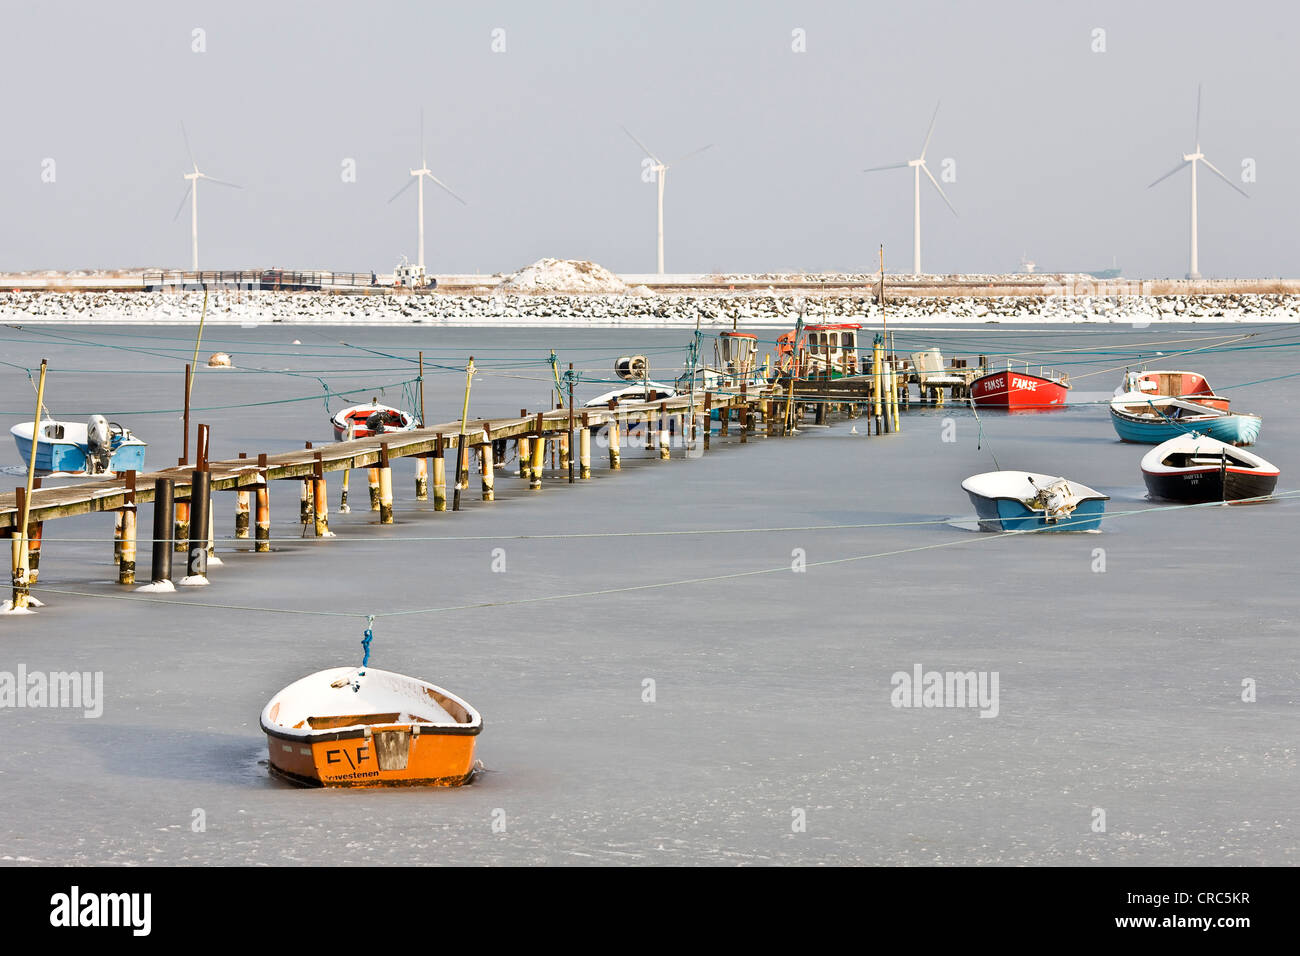 Small icebound boats at the coast of Amager, Denmark, Europe Stock Photo